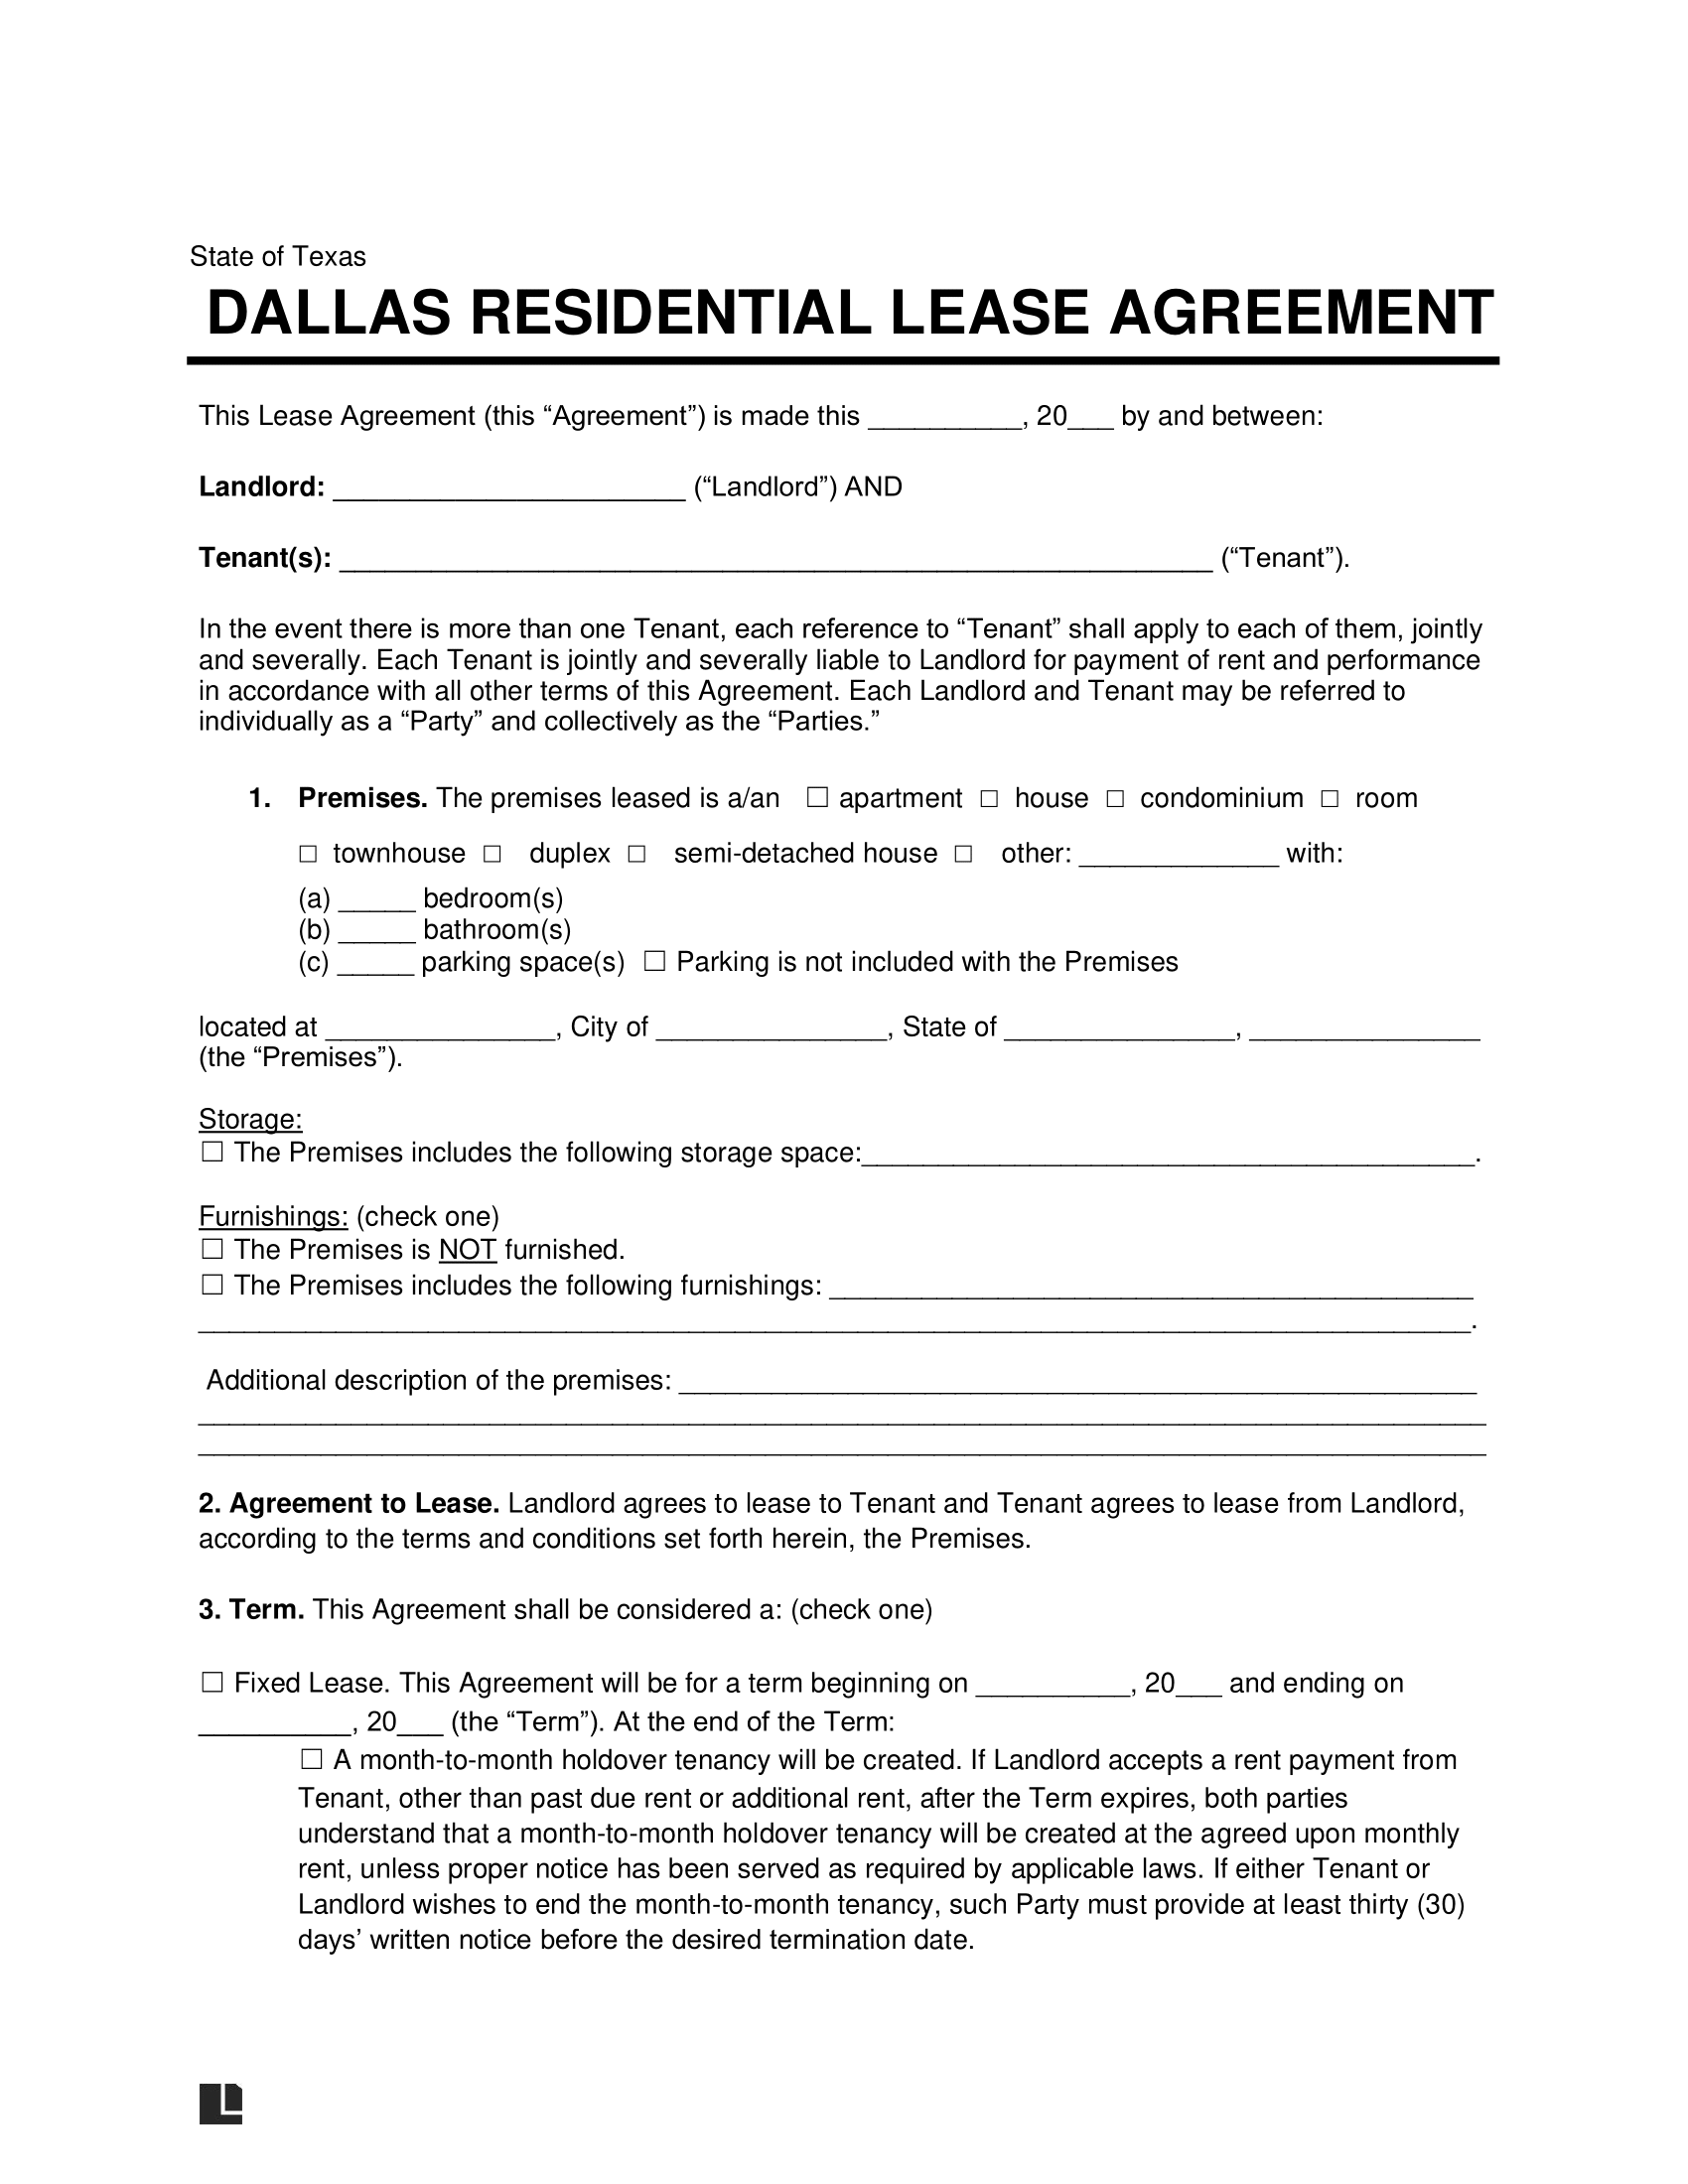 Dallas Residential Lease Agreement Template